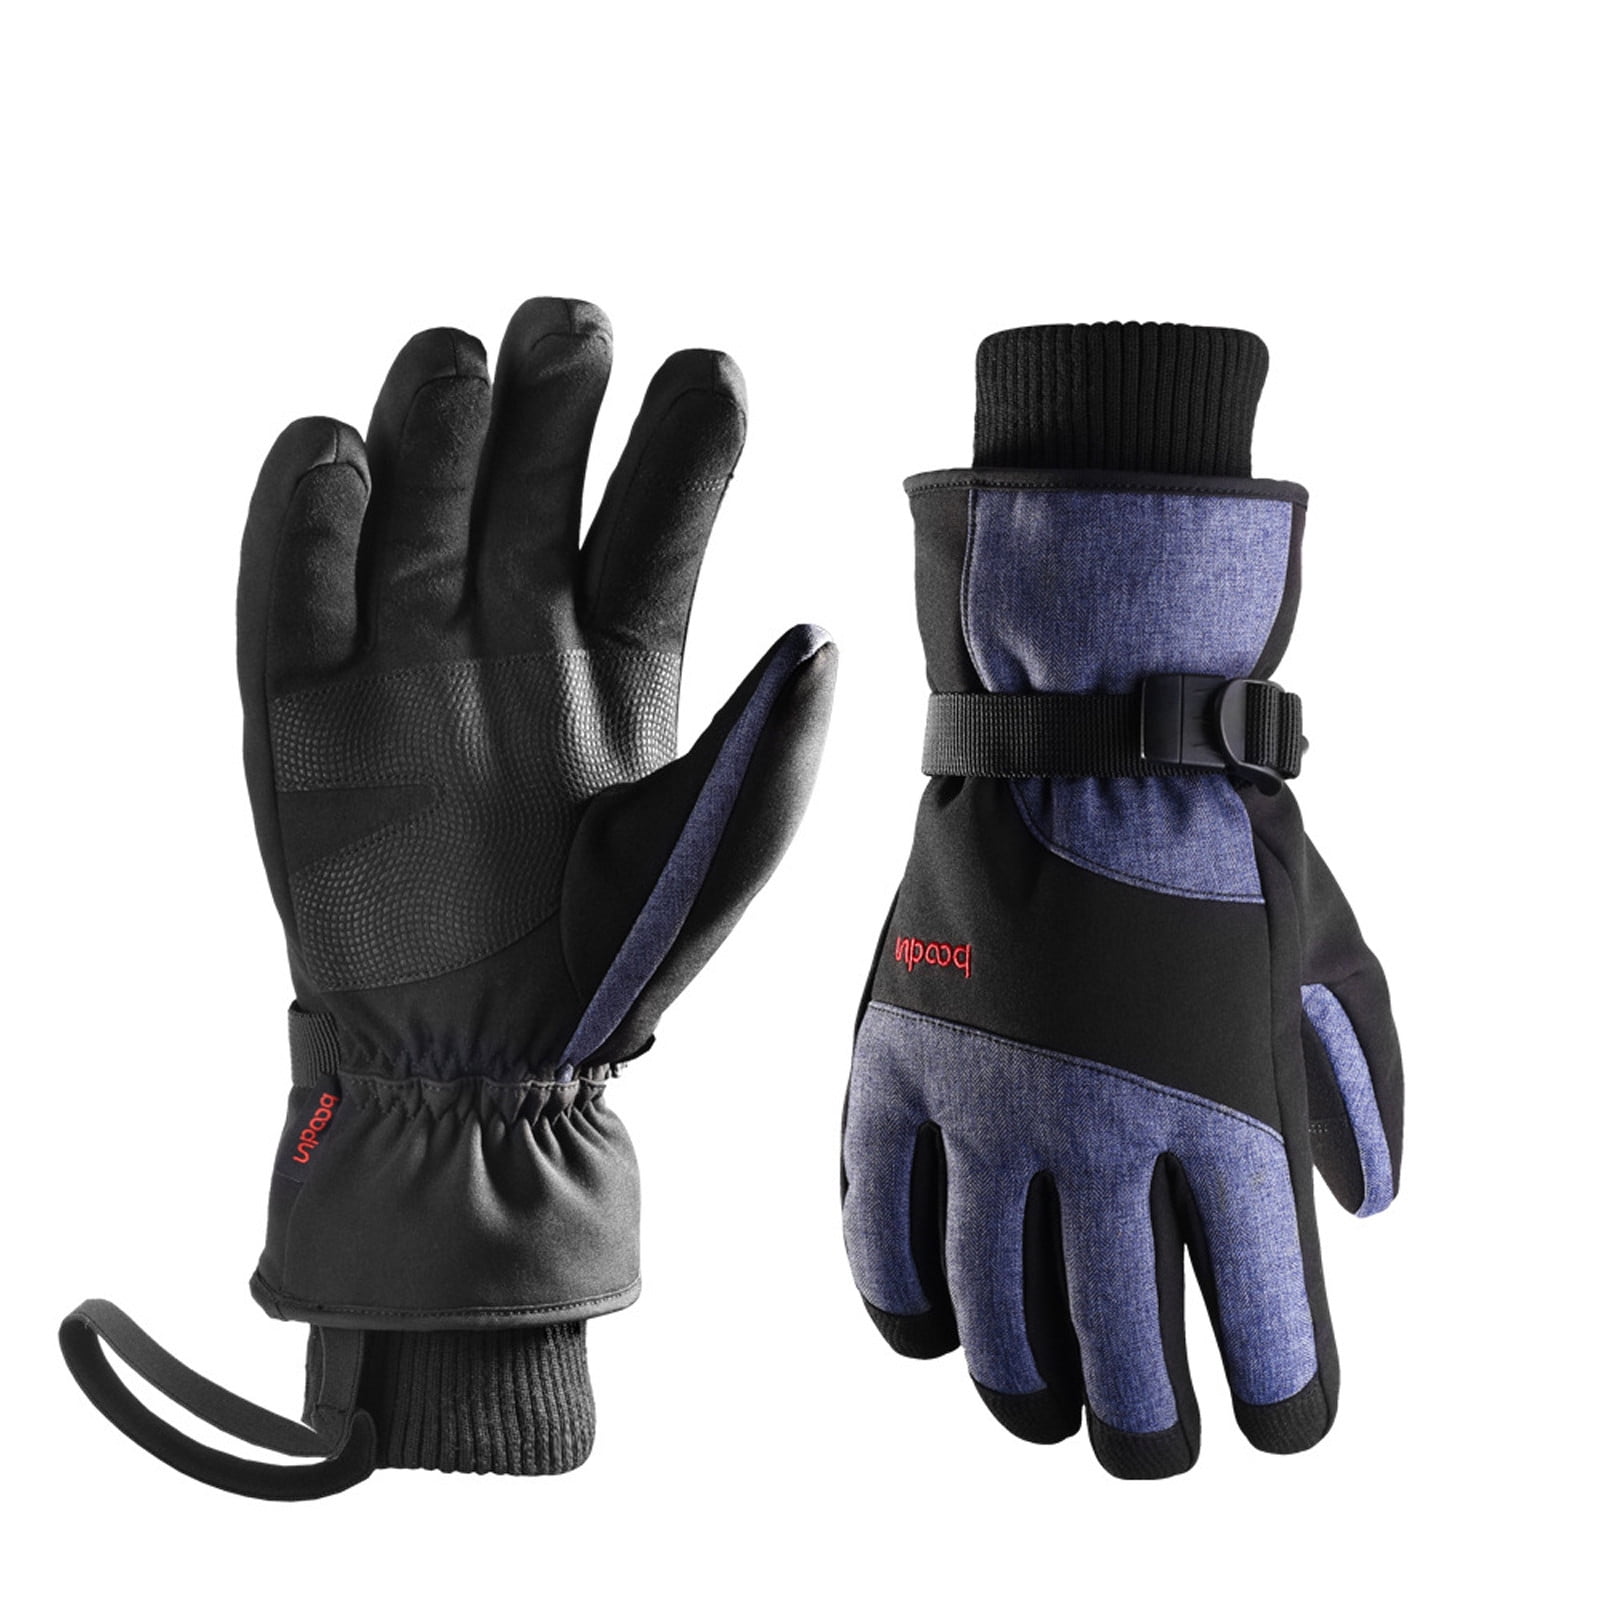 Riding Gloves Cycling Bike Full Finger Moto Racing Gloves Outdoor Sports 